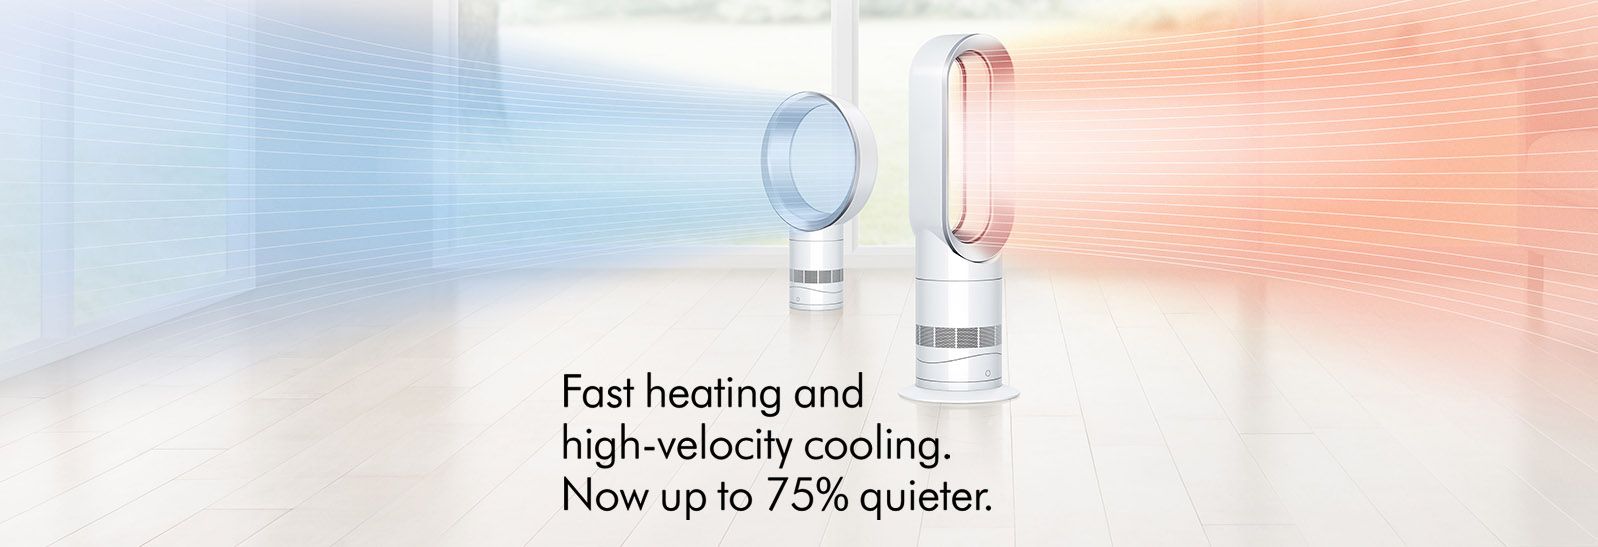 Dyson fans and heaters